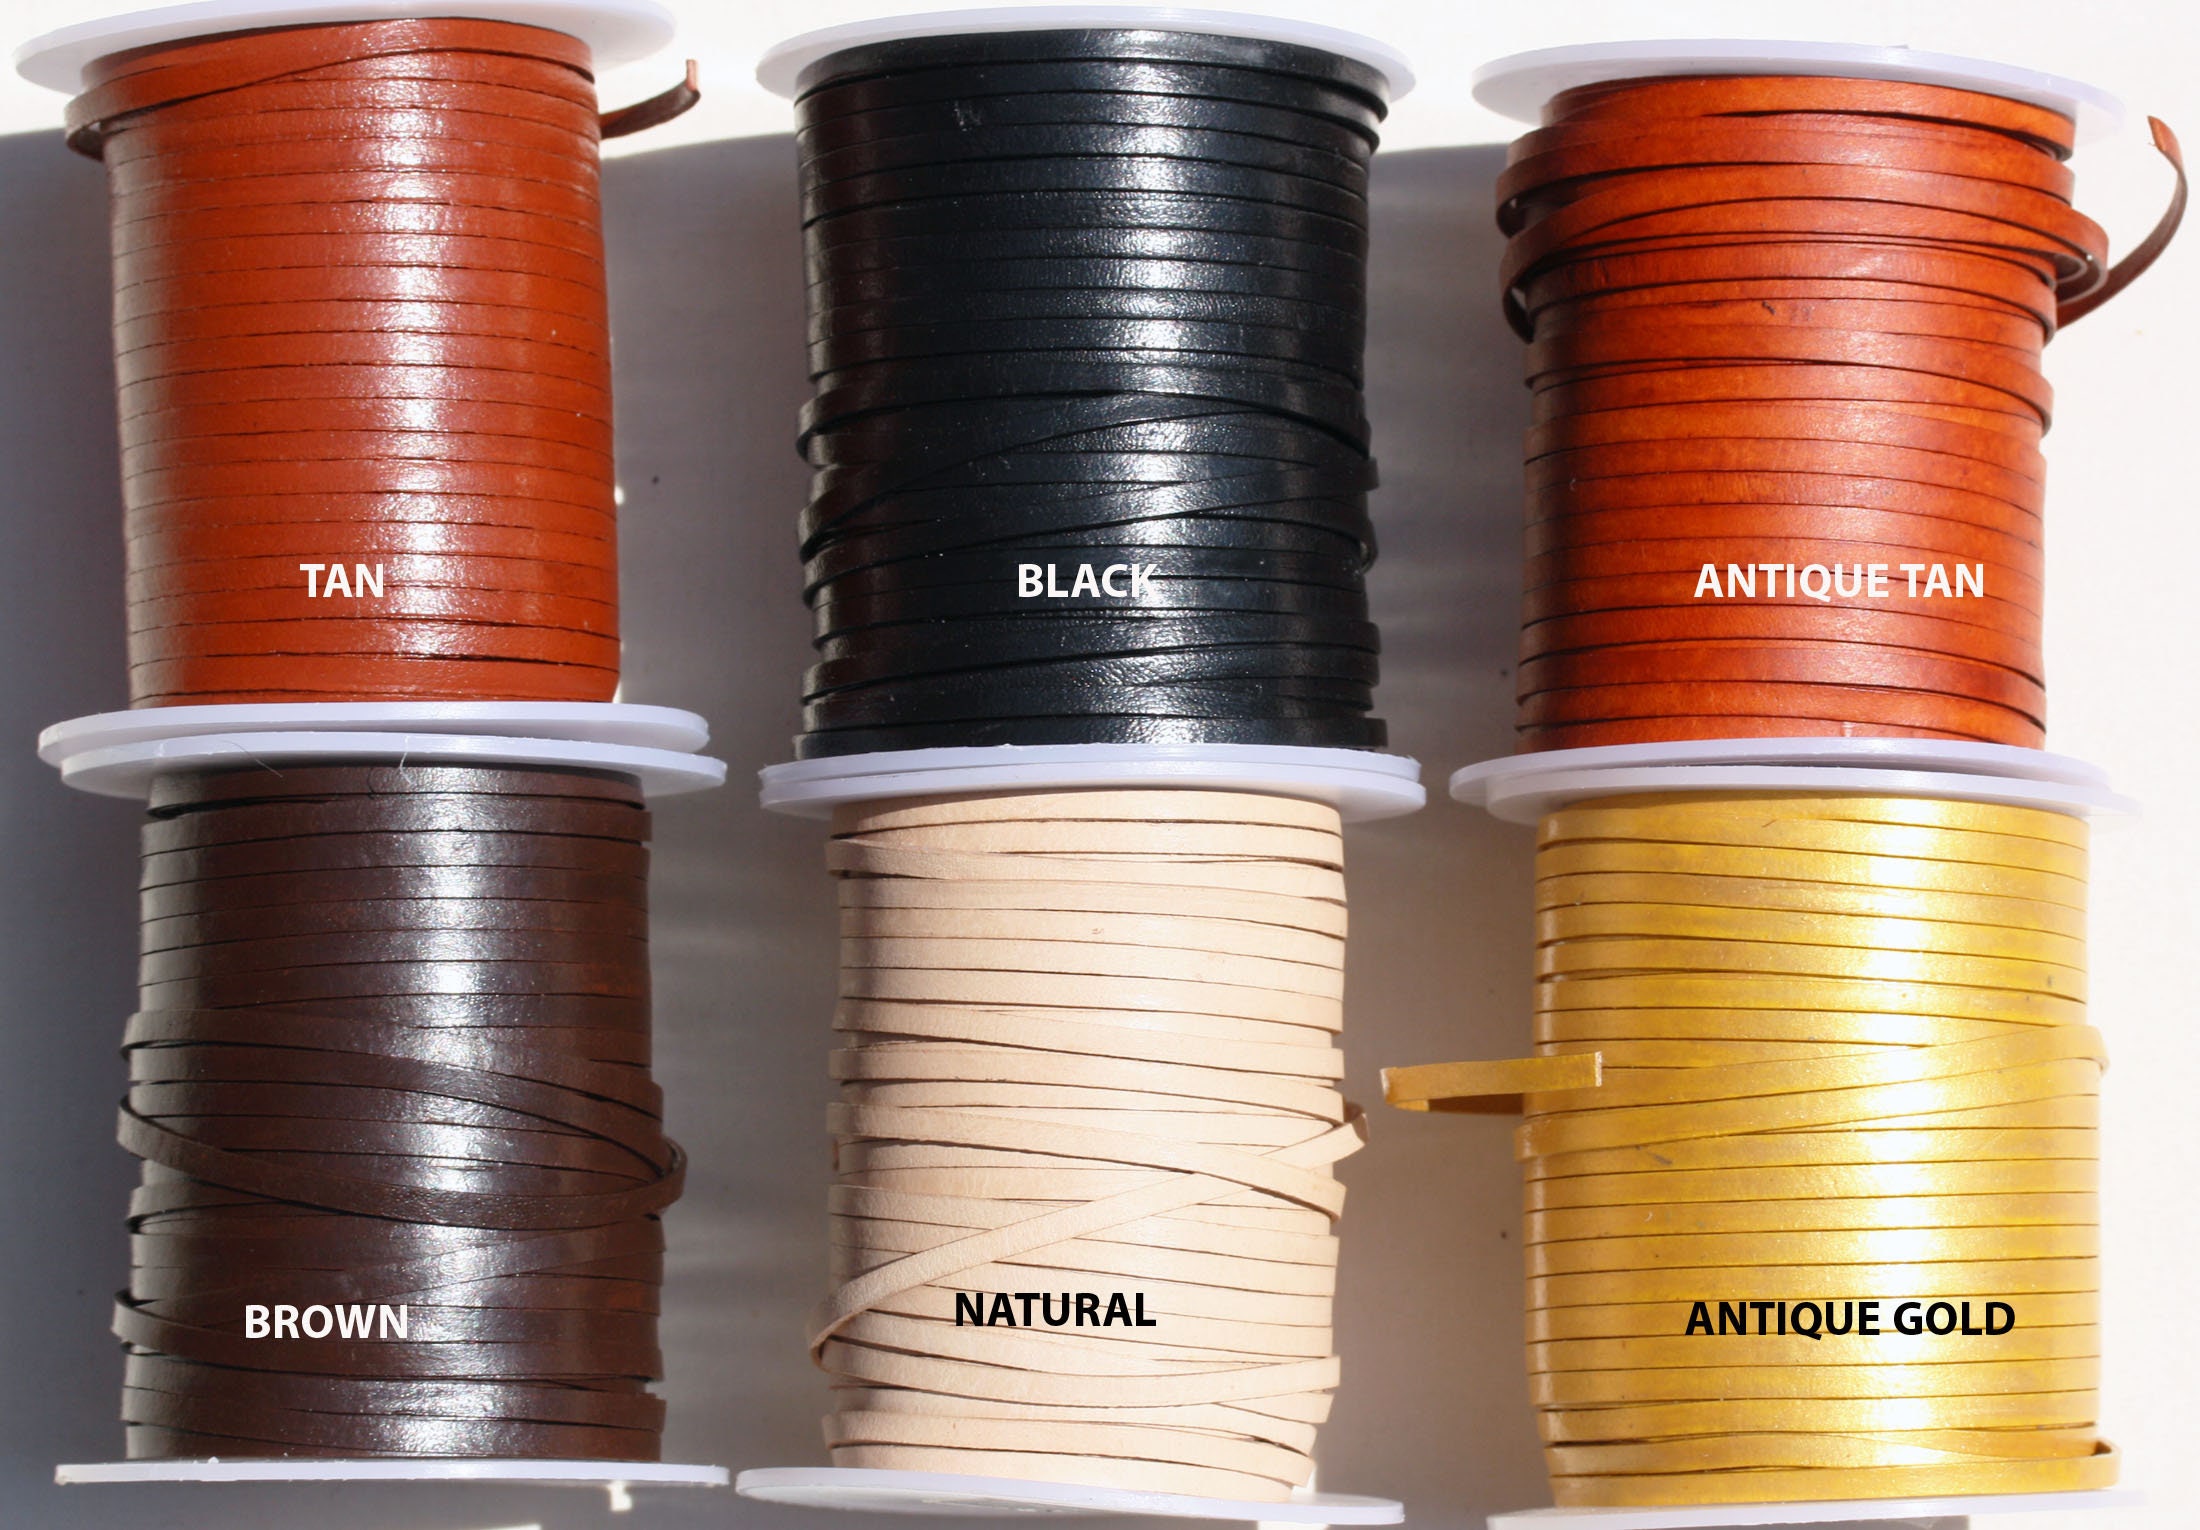 Michaels Brown Leather Strip by ArtMinds, Size: 1.5” x 42”